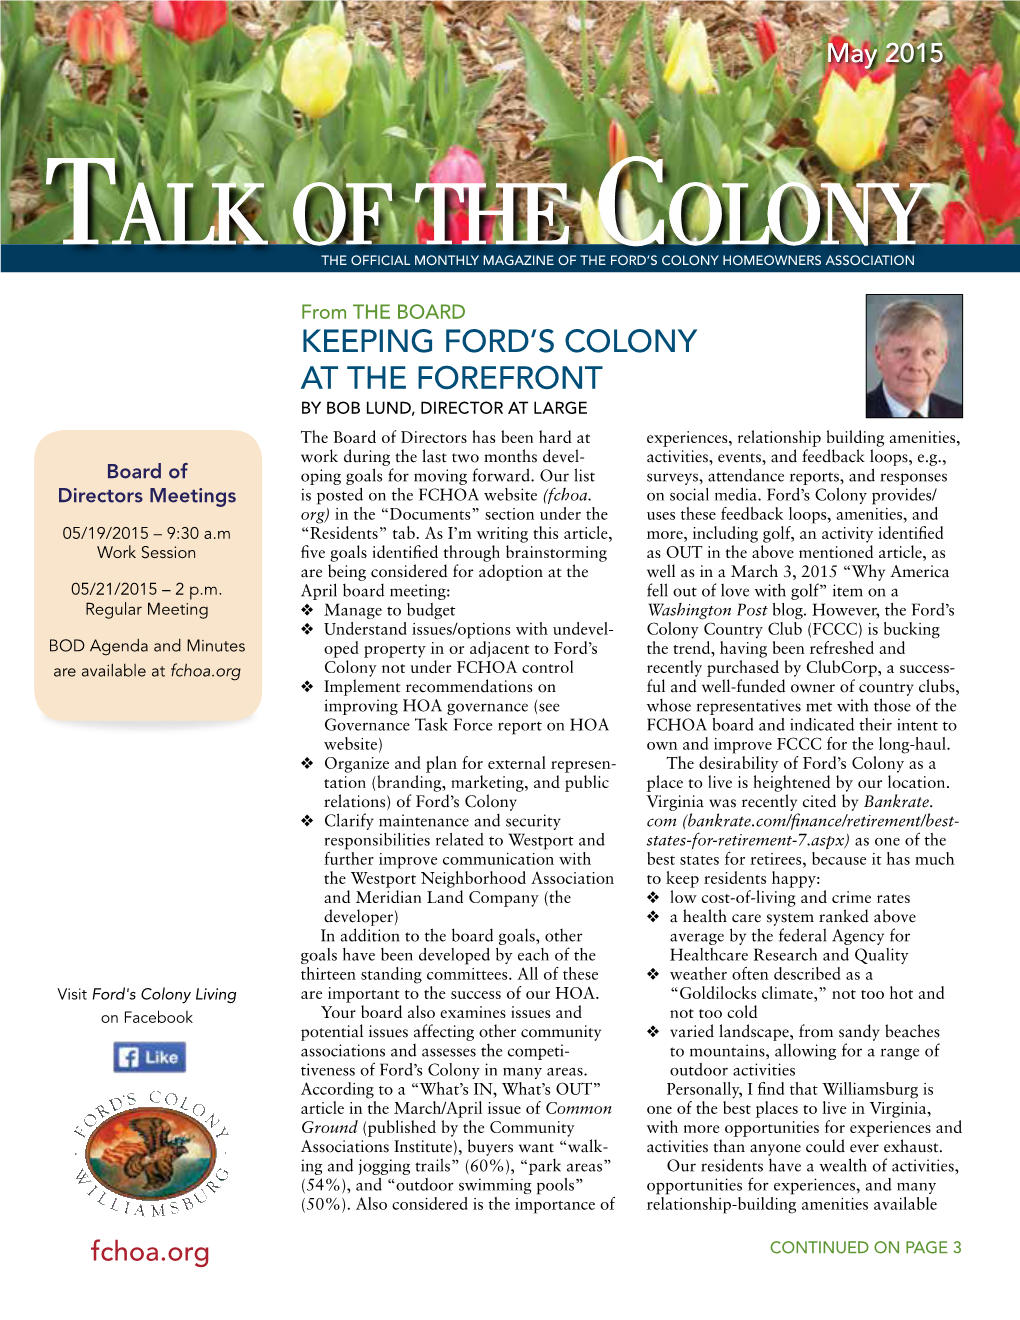 Talk of the Colony Talk of the Colony